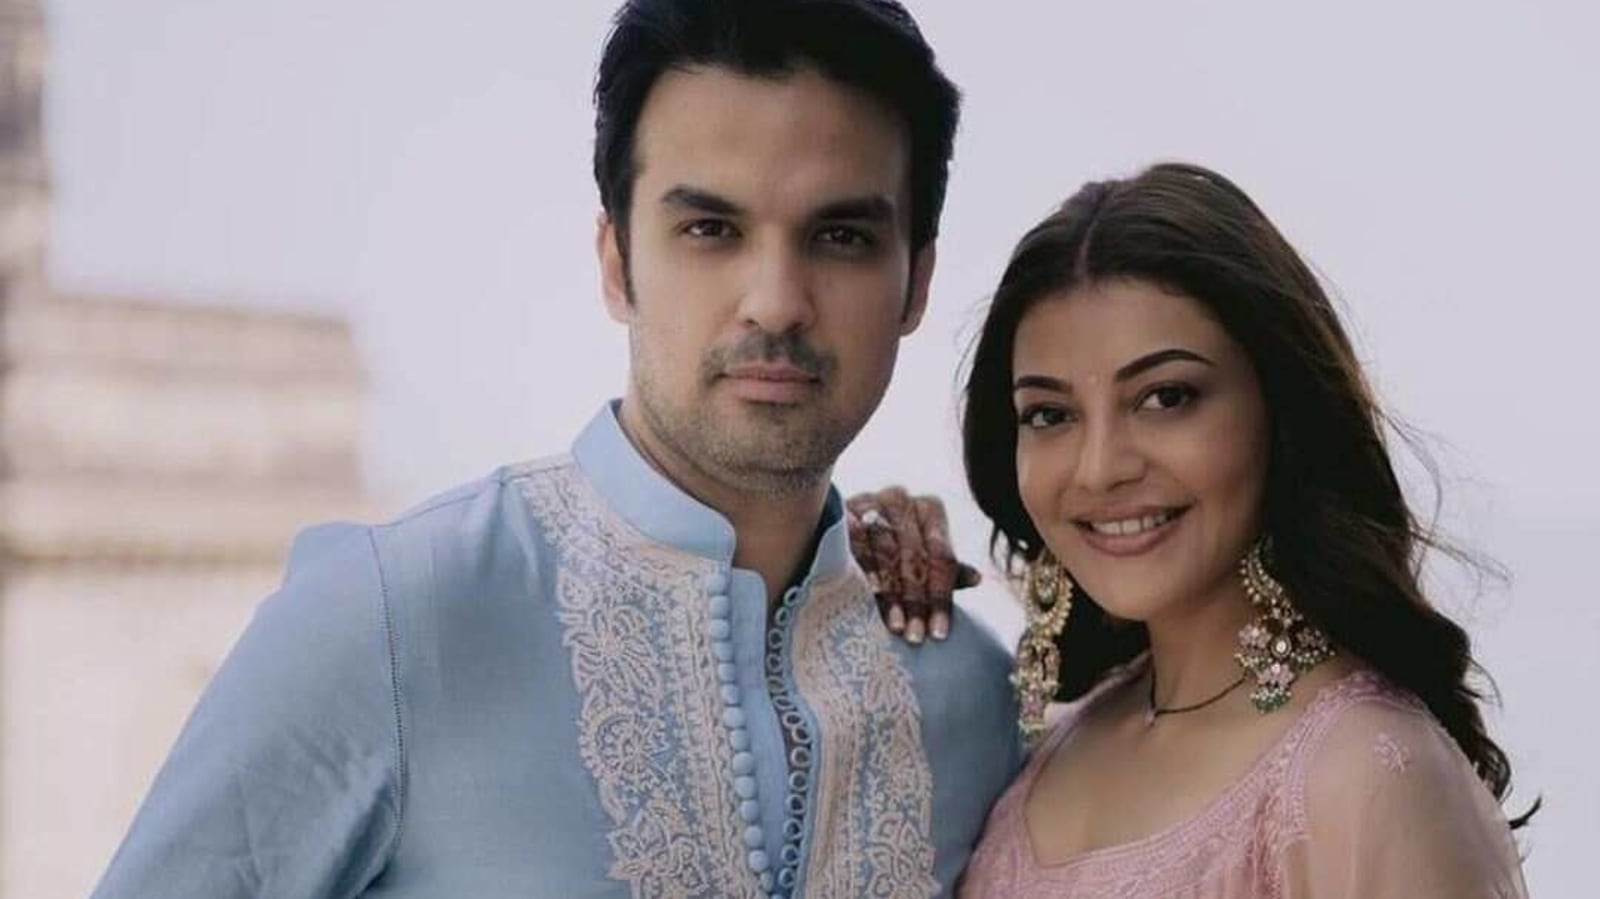 Xnxxx Kajal - Kajal Aggarwal gets 'bribes' from husband Gautam Kitchlu to make up for  lack of quality time with her. See photo | Bollywood - Hindustan Times